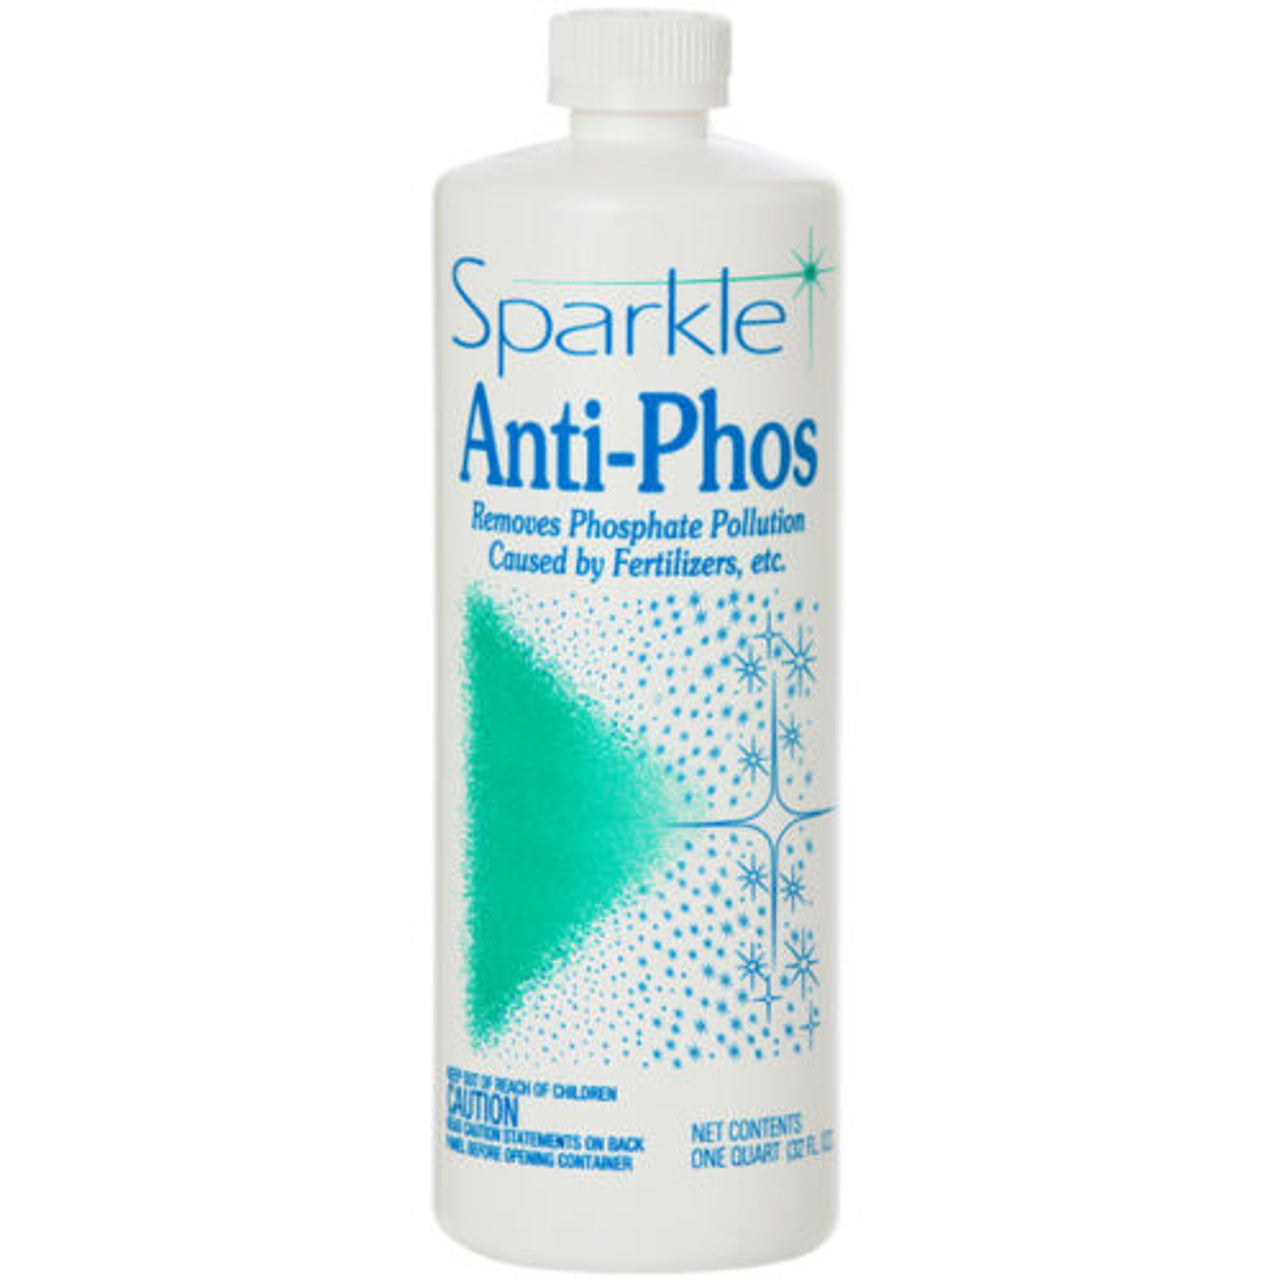 Sparkle Anti-Phos Phosphate Remover for Swimming Pools